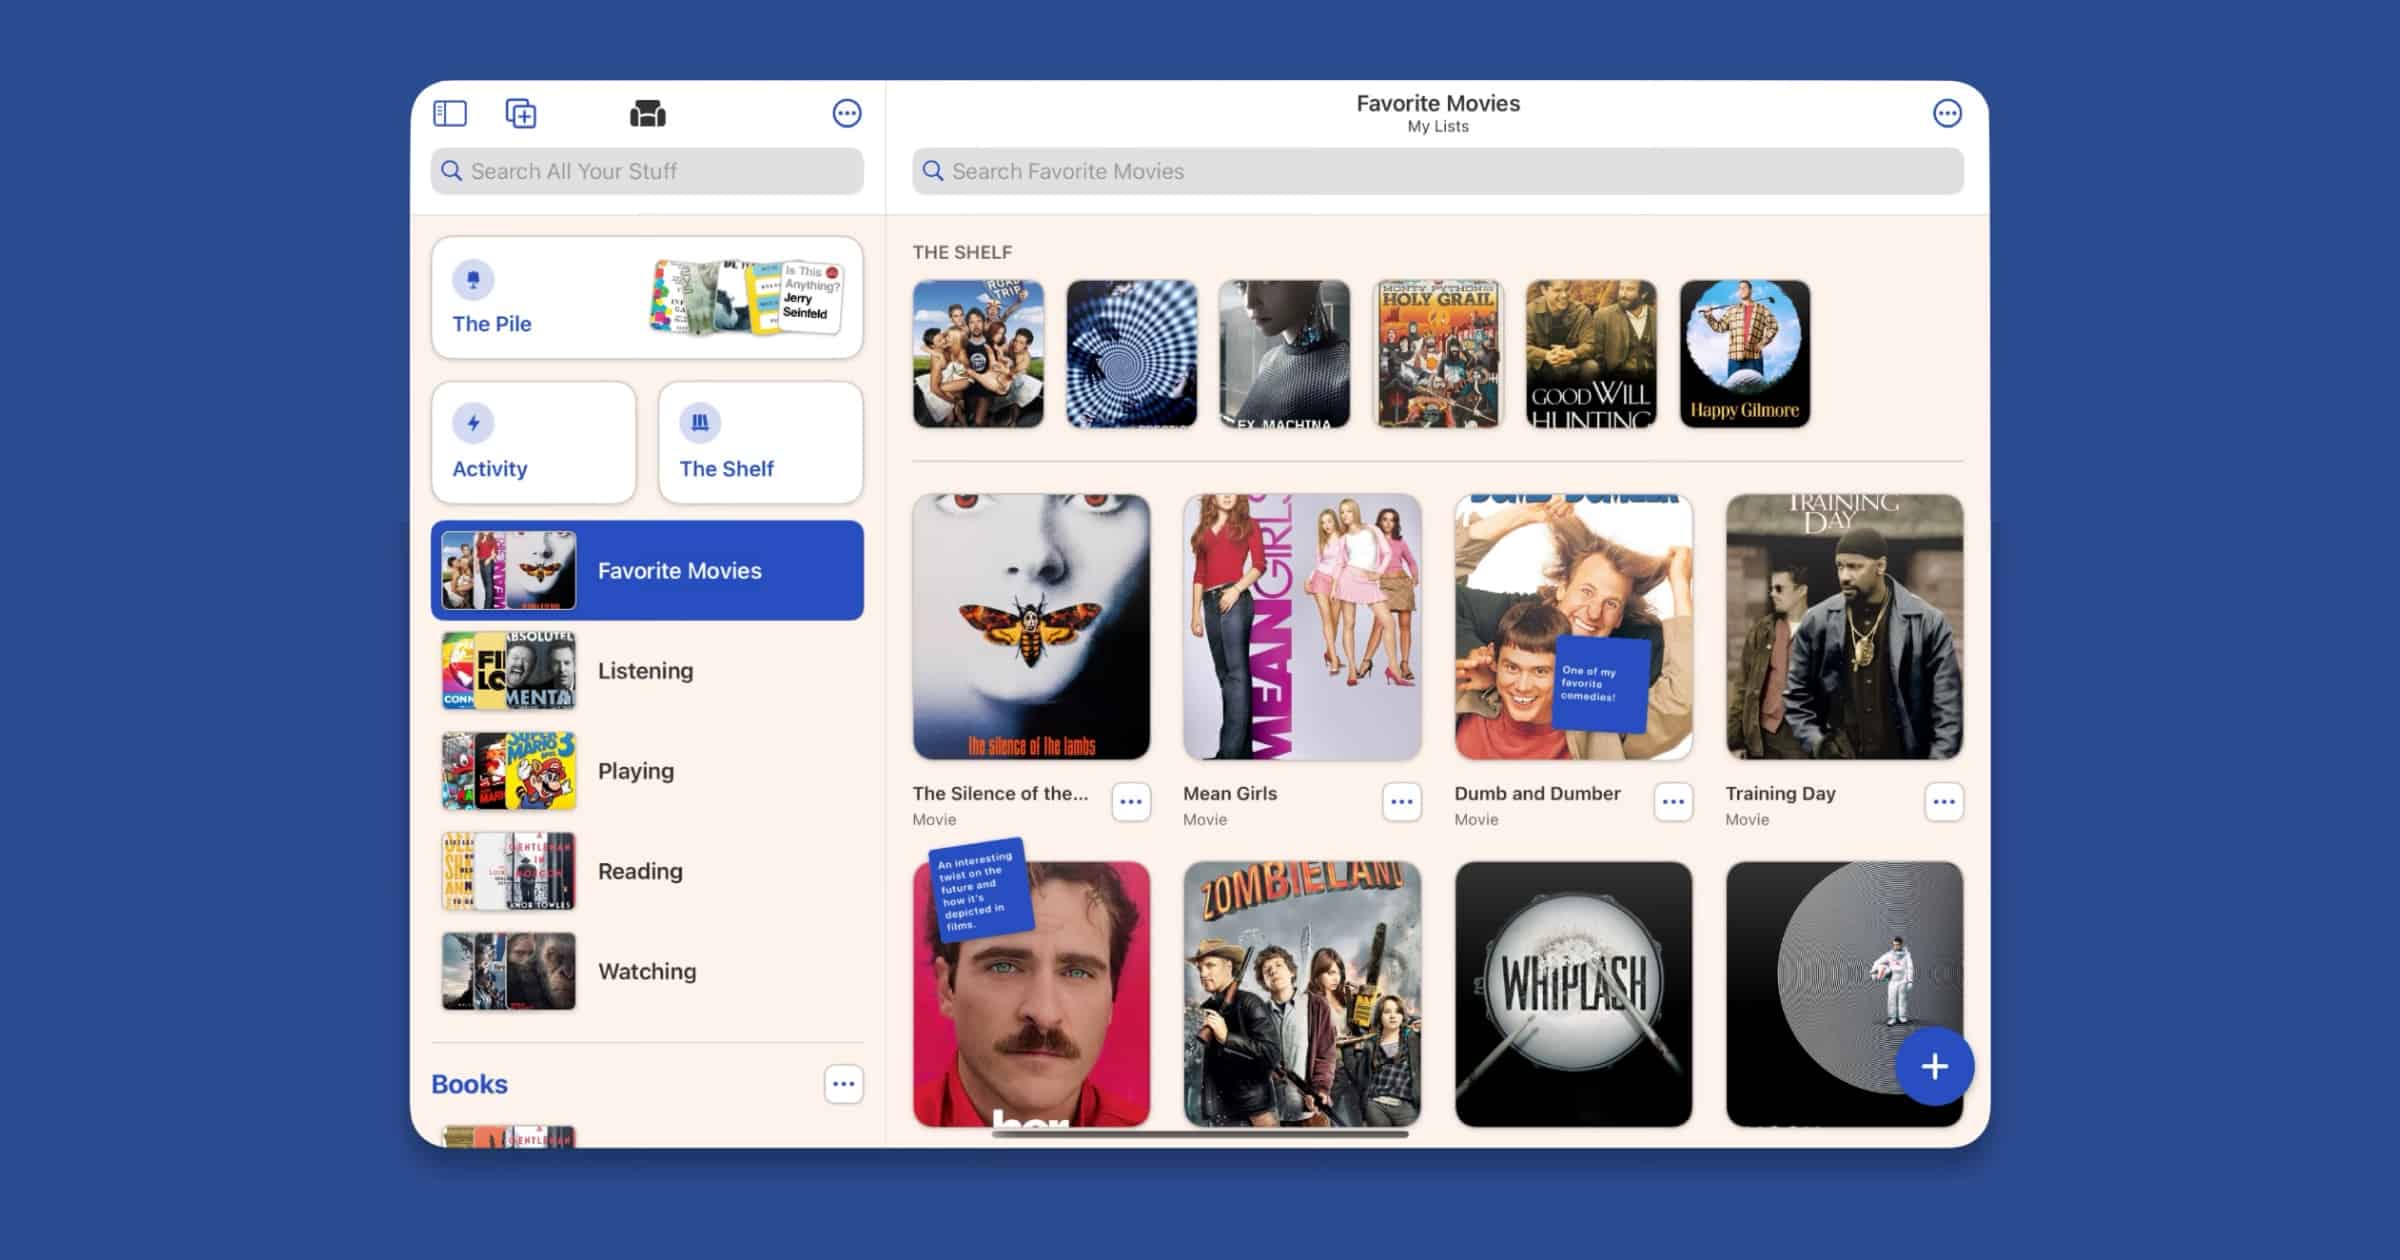 Major Update to Media Collection App ‘Sofa’ Adds Subscription for Pro Features